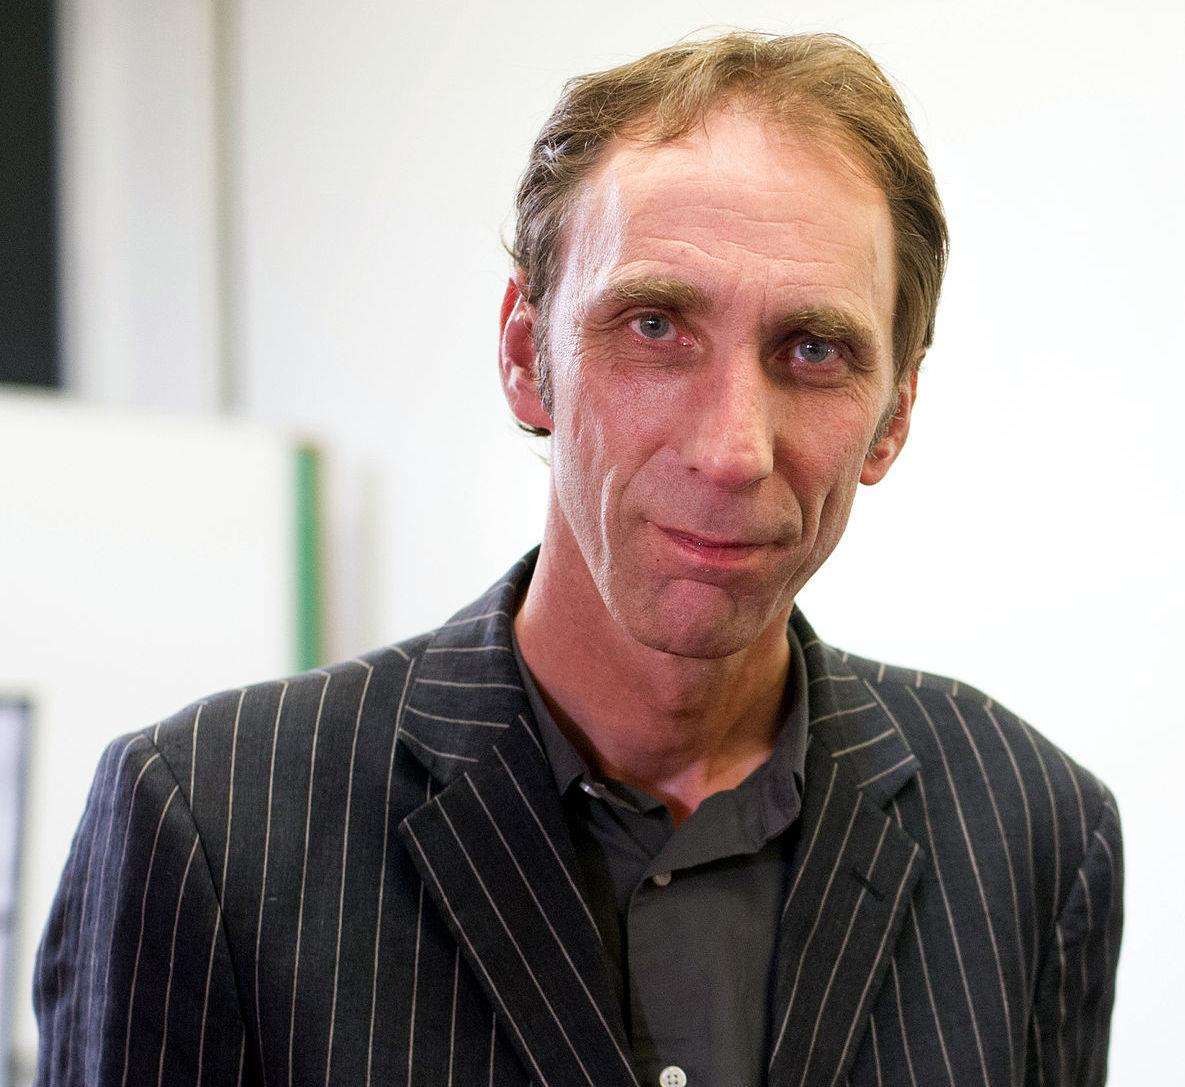 Author Will Self will be at the second literary festival